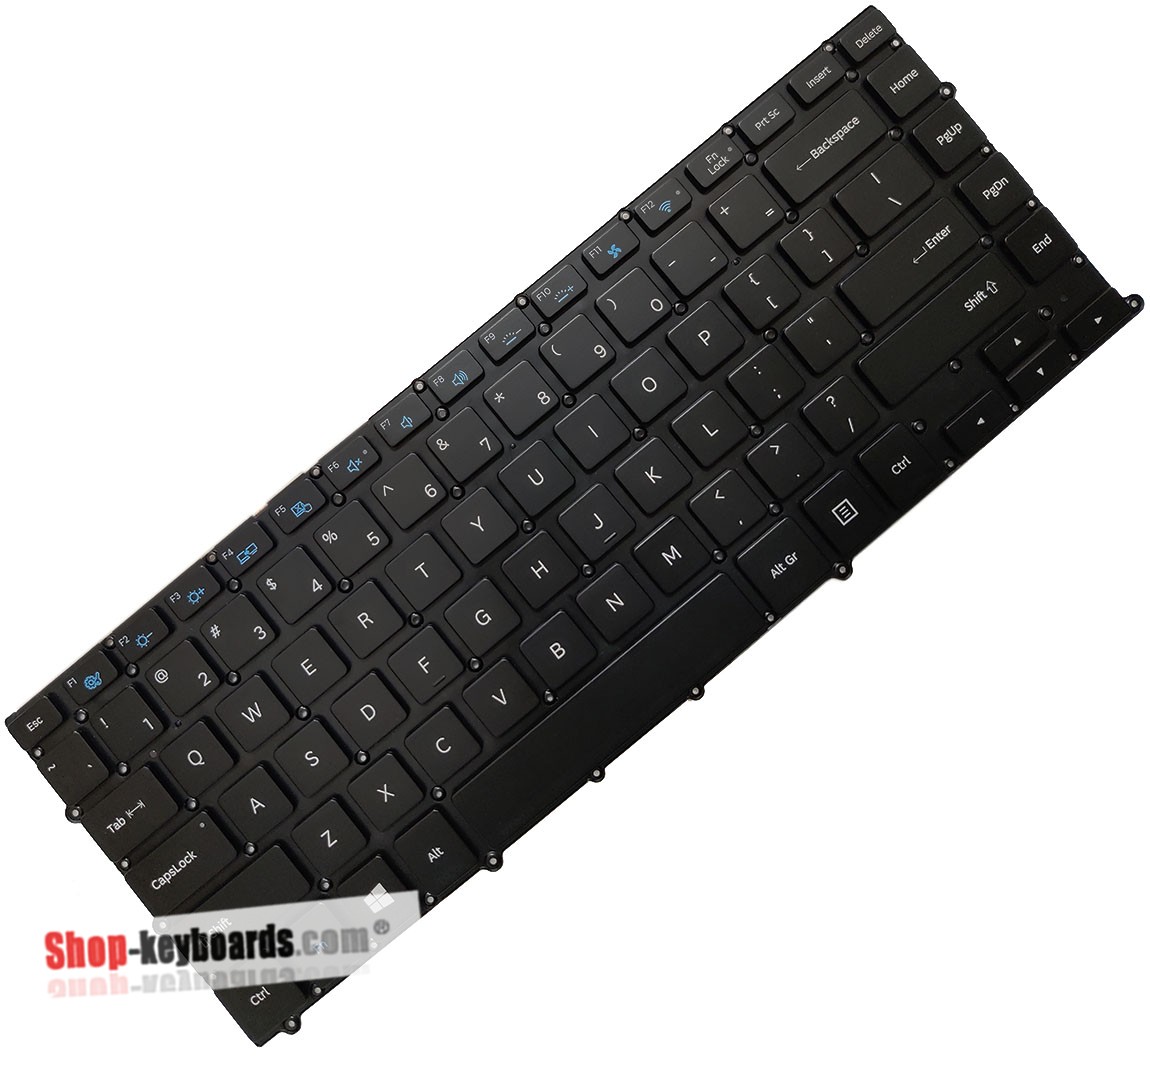 Samsung NP900X4C-A02US Keyboard replacement